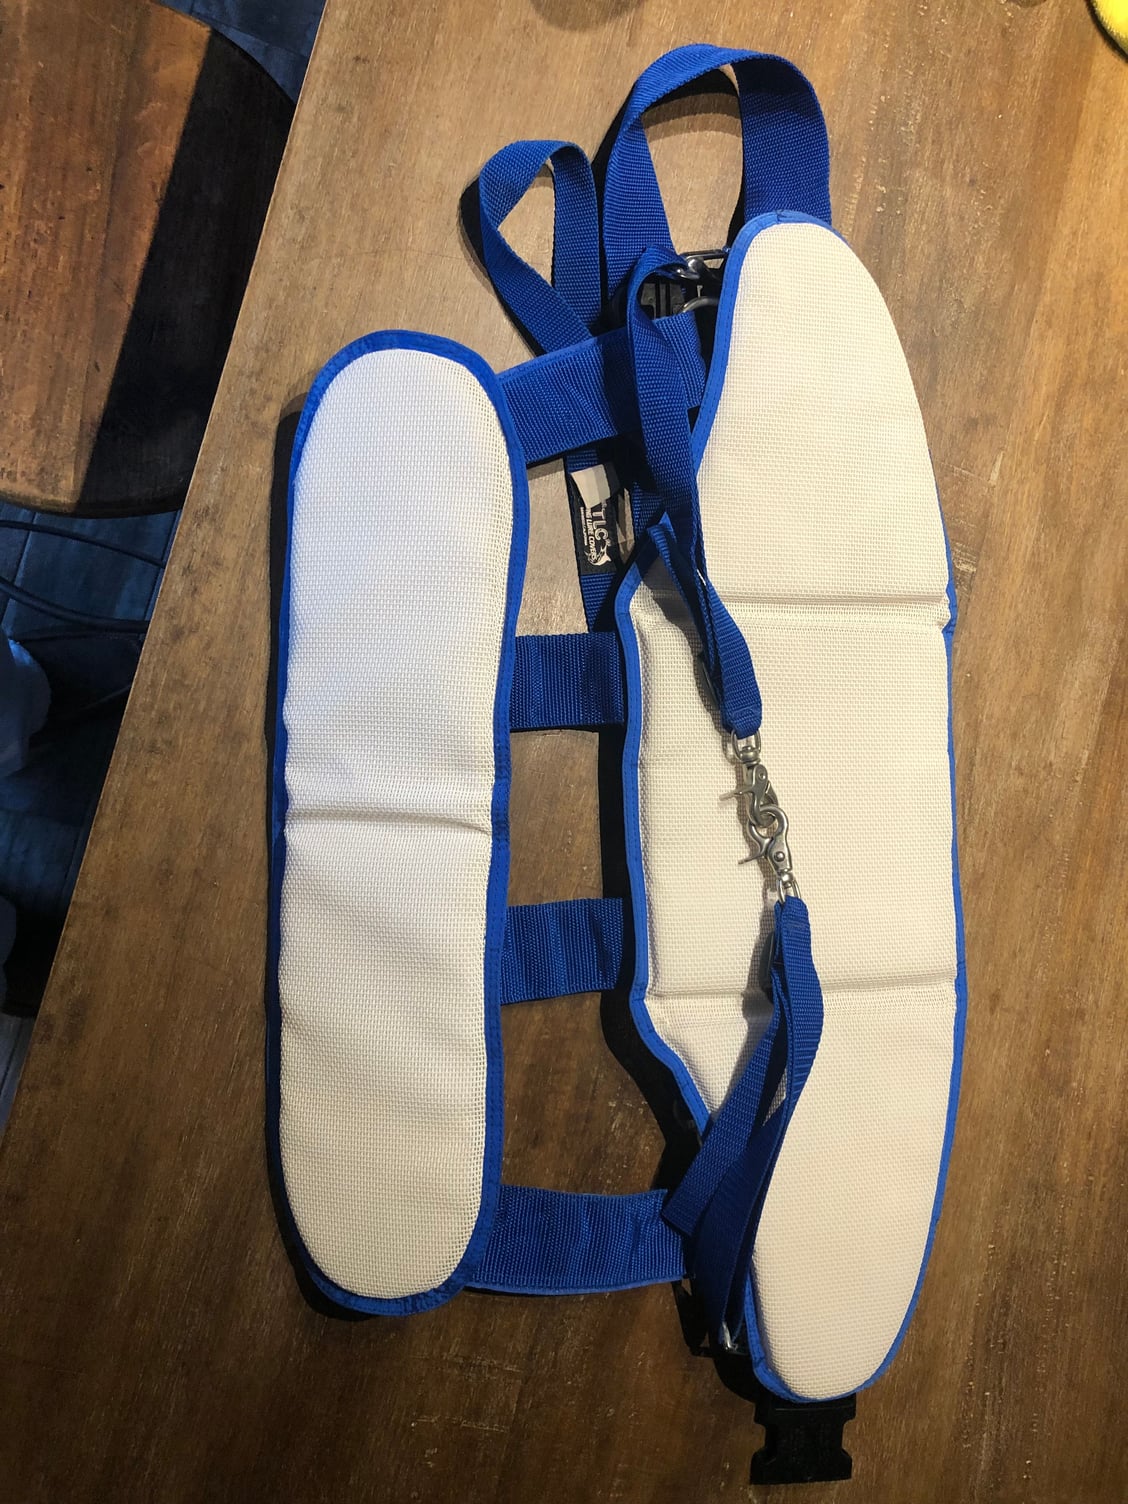 Braid fishing harness and belt for sale - The Hull Truth - Boating